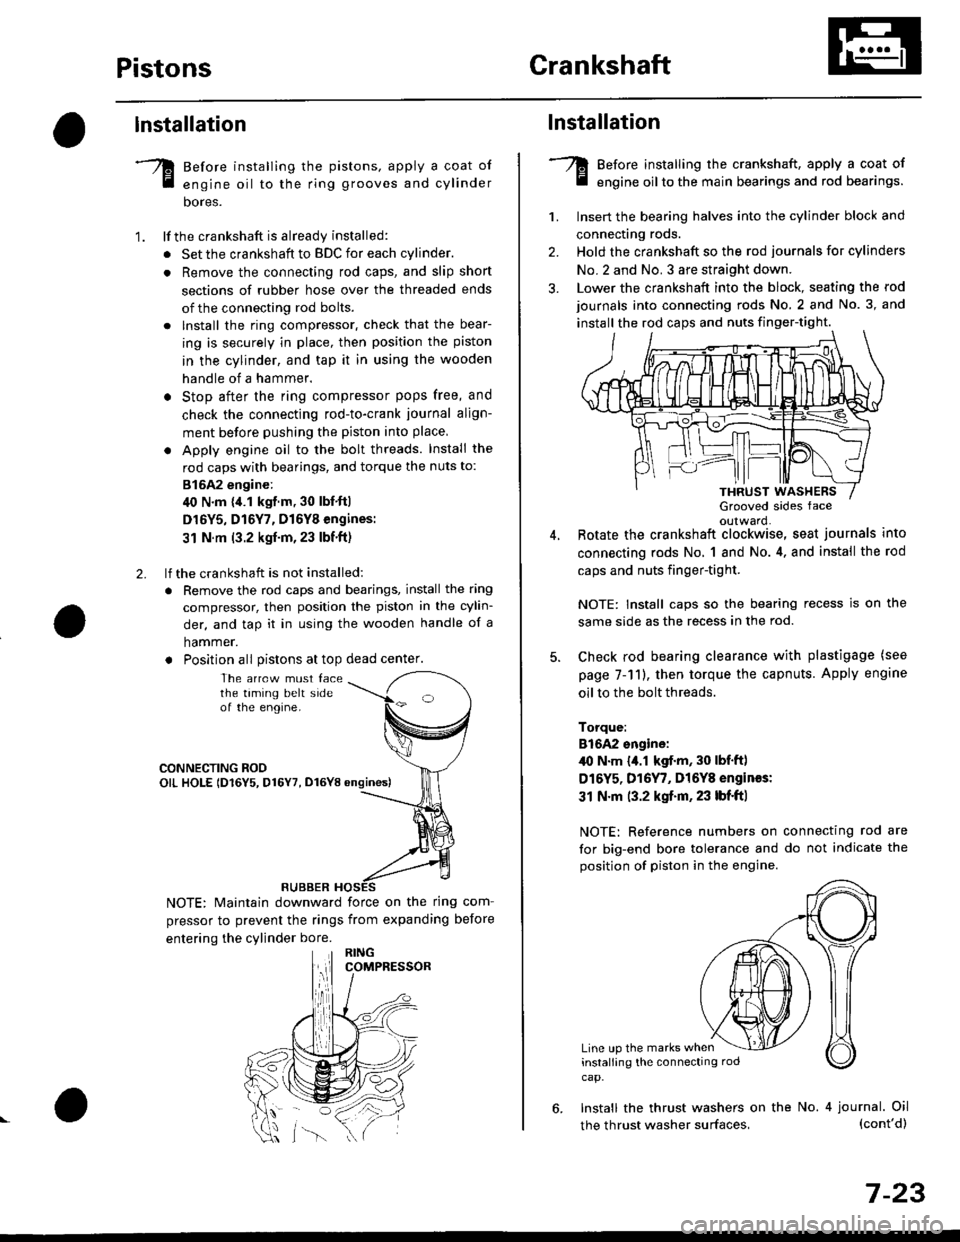 HONDA CIVIC 1996 6.G User Guide PistonsGrankshaft
lnstallation
Before installing the pistons, apply a coat of
engine oil to the ring grooves and cylinder
bores.
lf the crankshaft is already installed:
. Set the crankshaft to BDC for